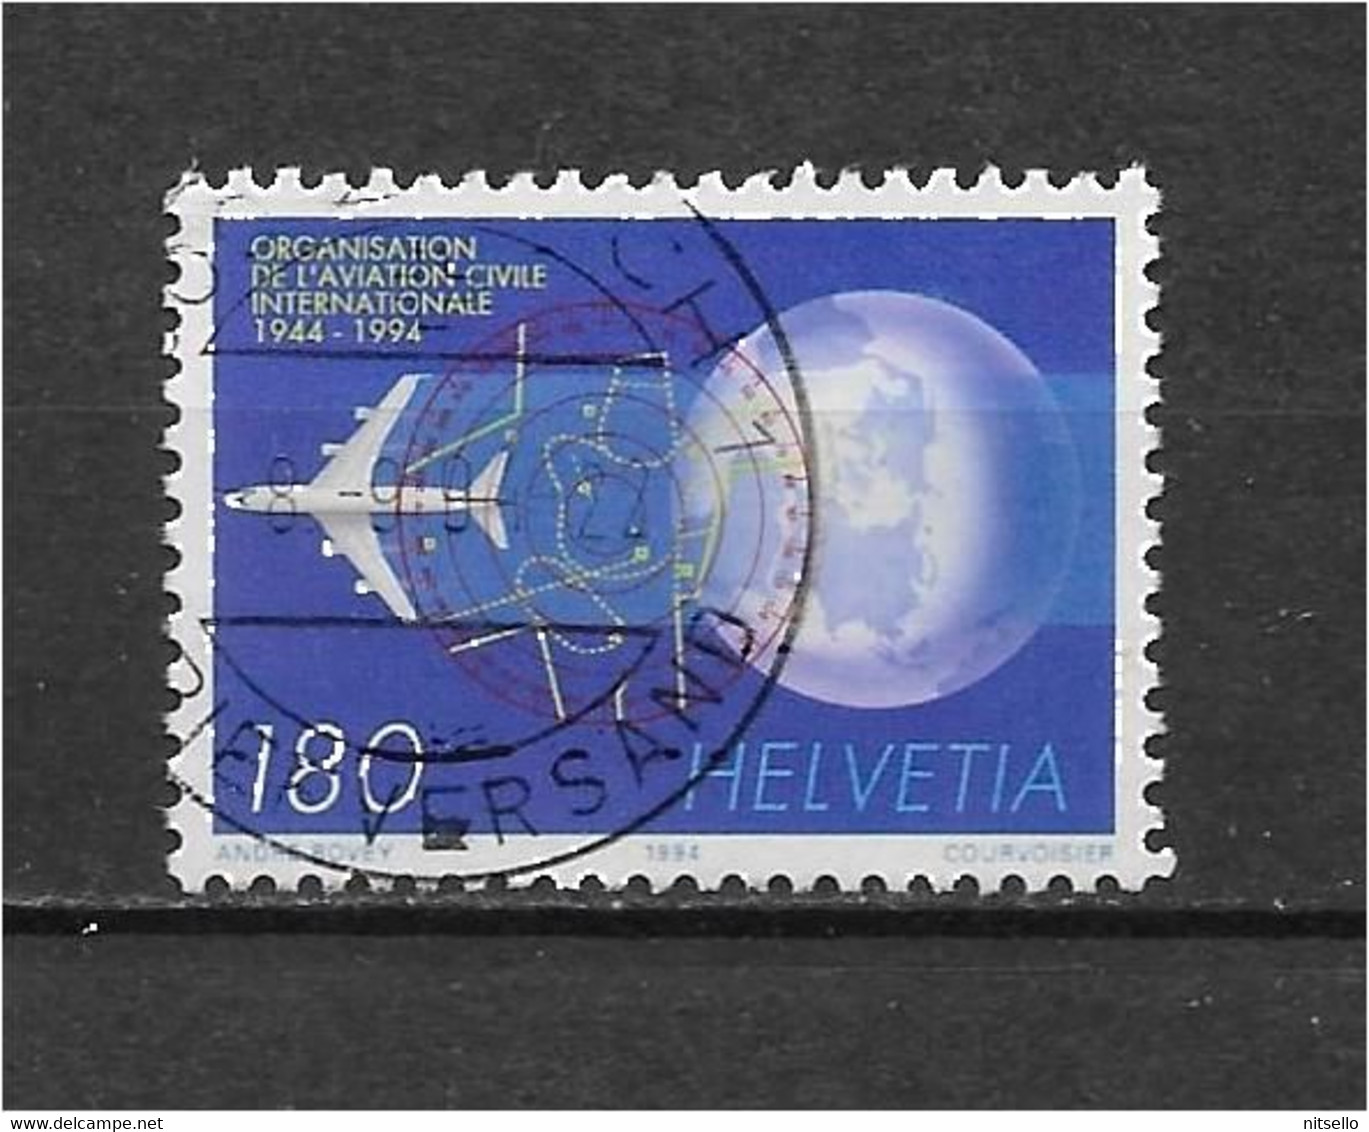 LOTE 1530A /// SUIZA YVERT Nº: 1448  ¡¡¡ OFERTA - LIQUIDATION - JE LIQUIDE !!! - Used Stamps